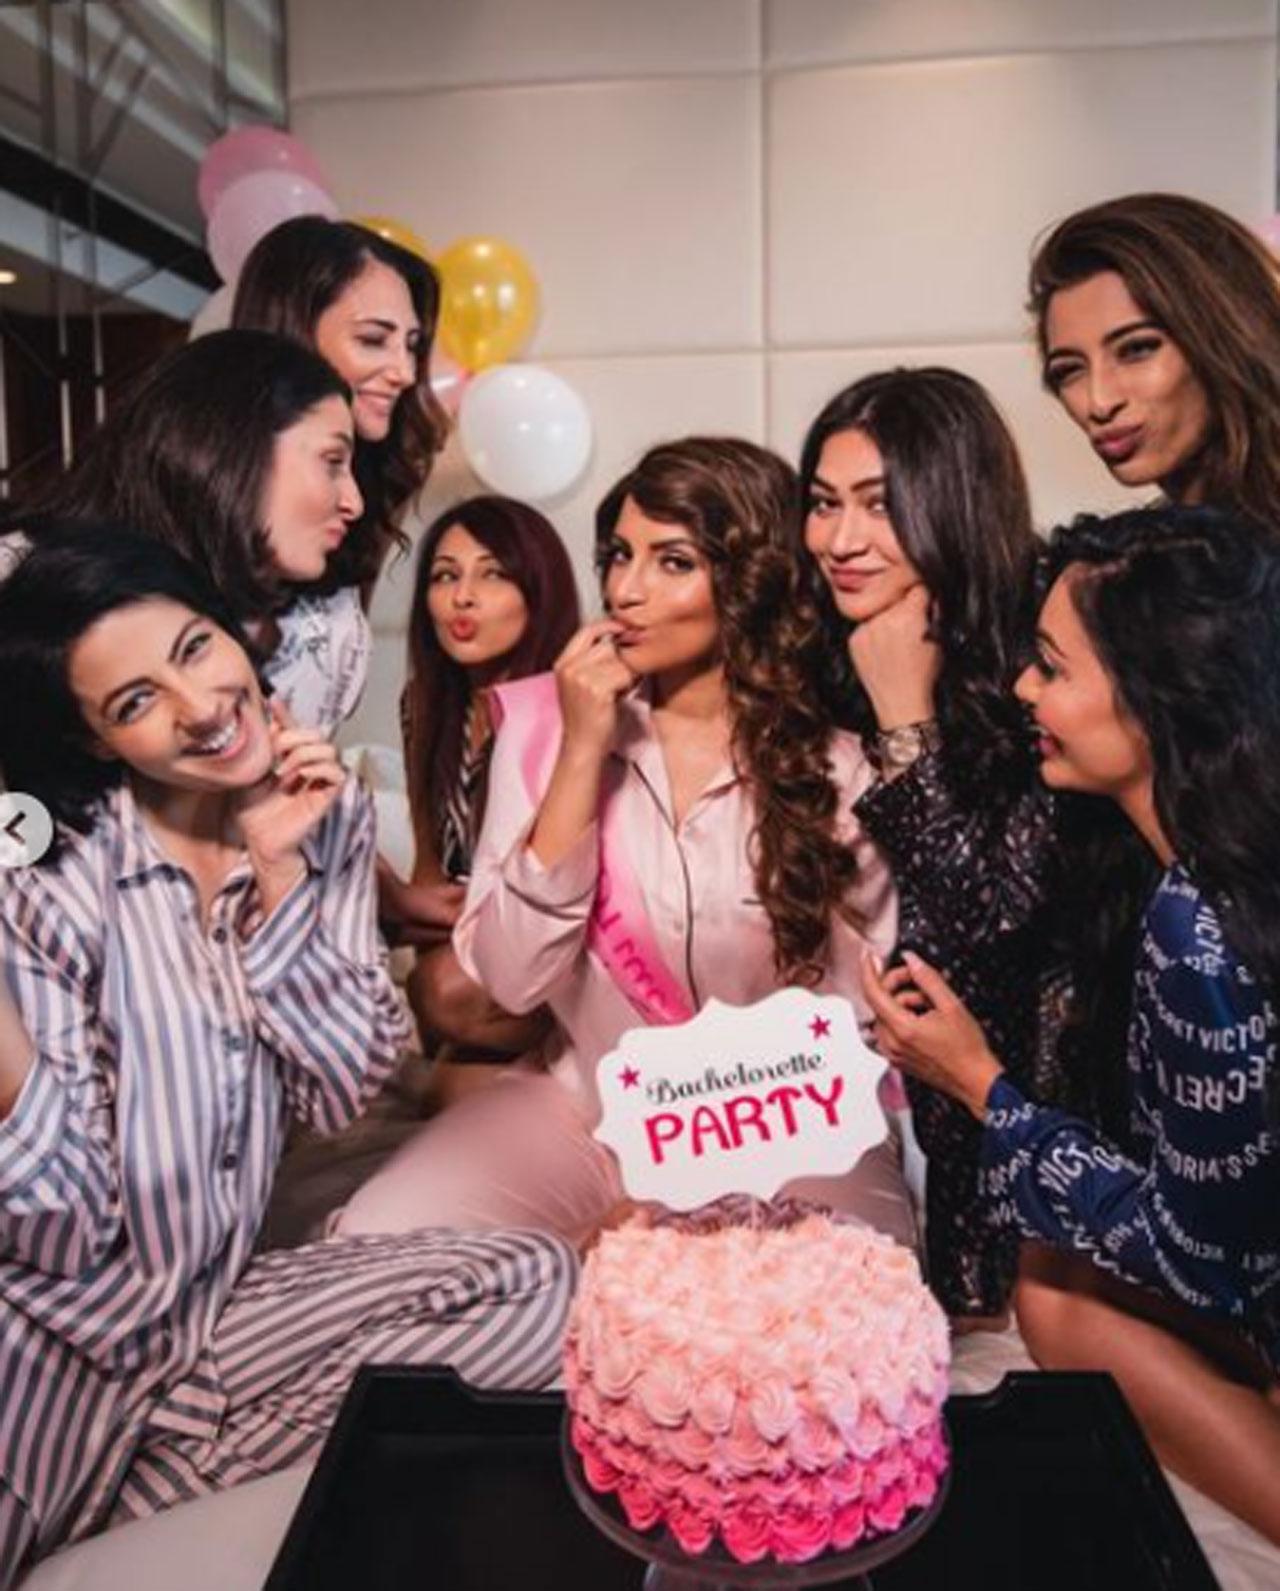 The 'Ye Meri Life Hai' actor took to Instagram and shared a glimpse of her pre-wedding bash. Shama looks pretty in a white satin robe with 'bride' written on the back. She also wore a headband which has 'bride' written on it.